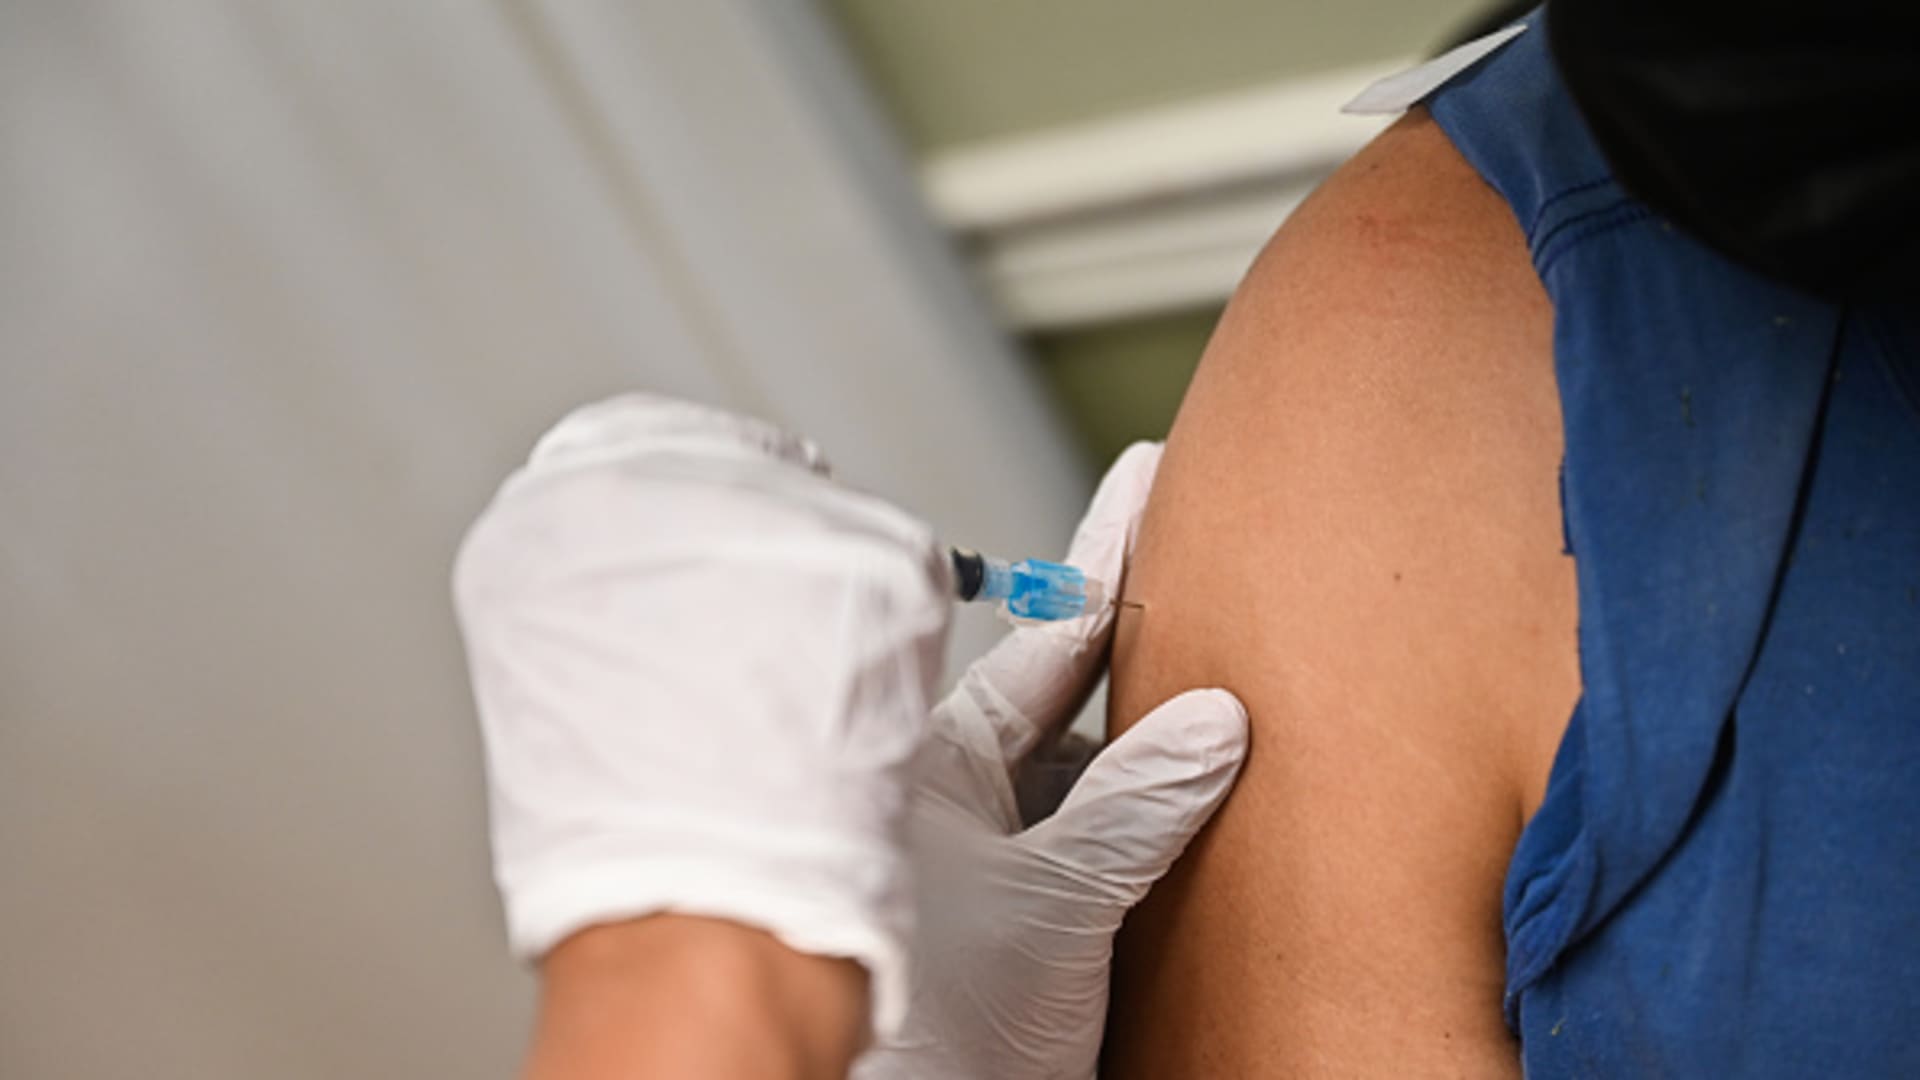 Westbury, N.Y.: A man receives the Moderna COVID-19 vaccine while at the Long Island federally qualified health center, in Westbury, New York, on April 29, 2021. (Photo by Steve Pfost/Newsday via Getty Images)